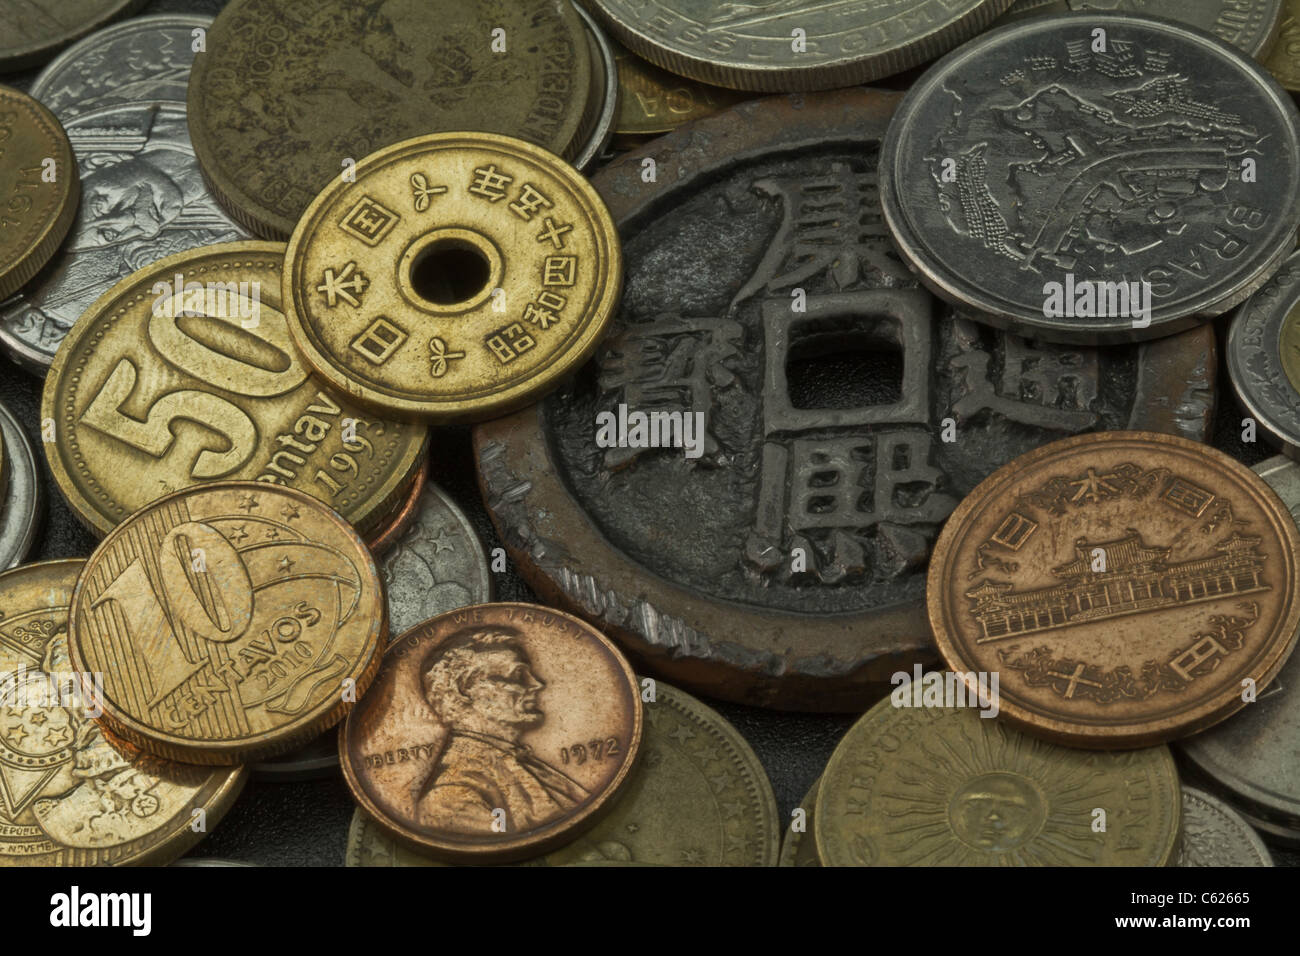 Old coins of several countries and colors Stock Photo